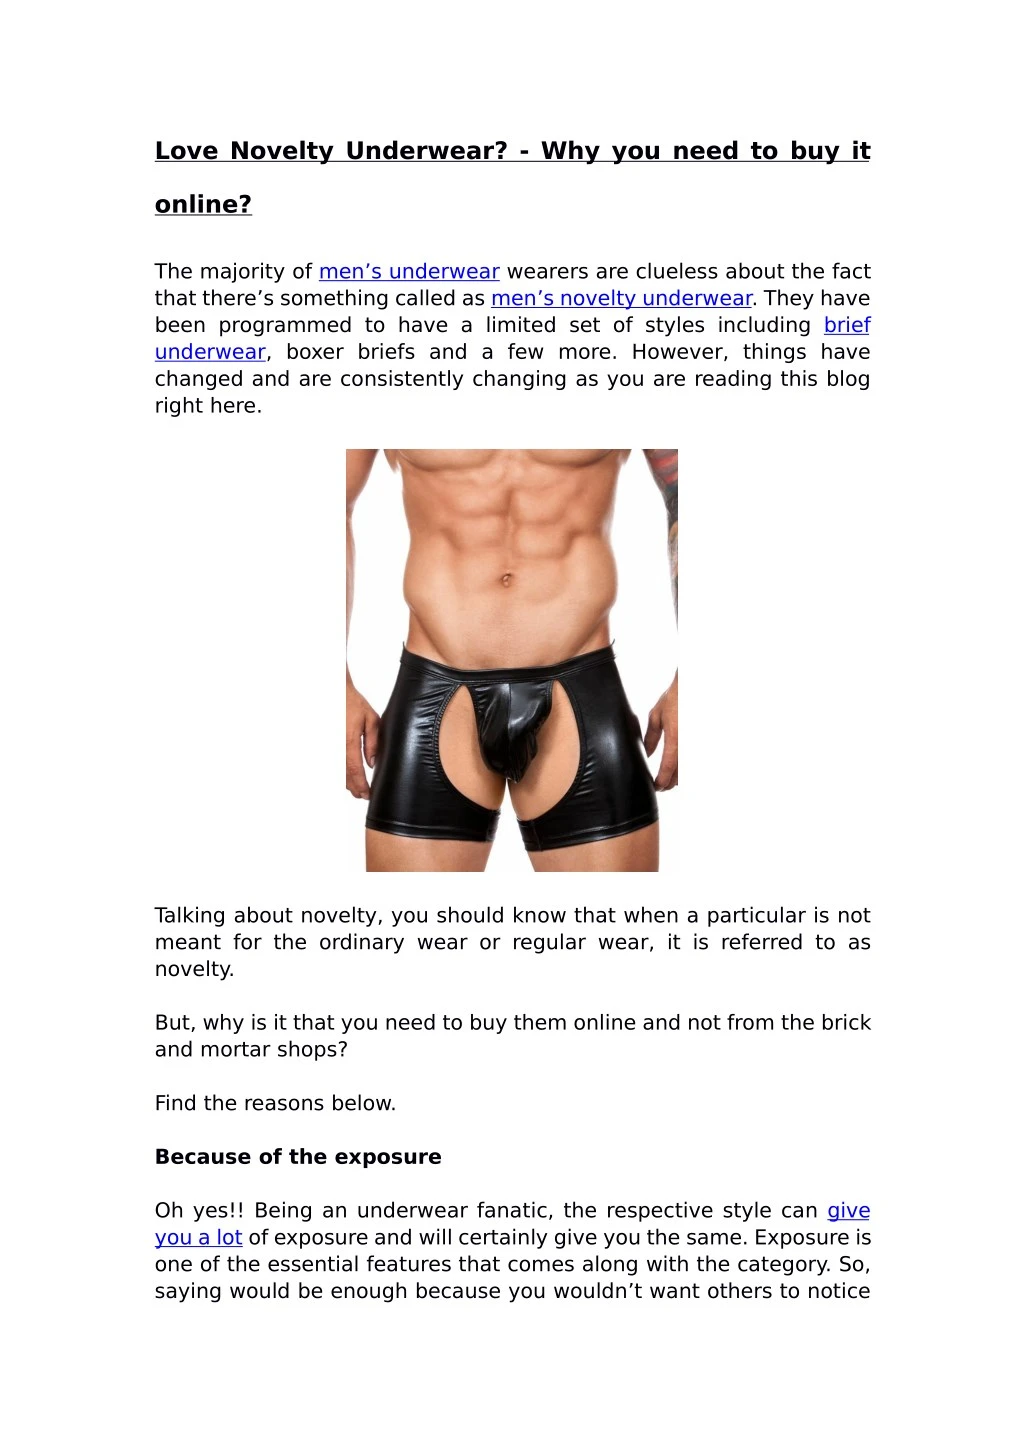 love novelty underwear why you need to buy it